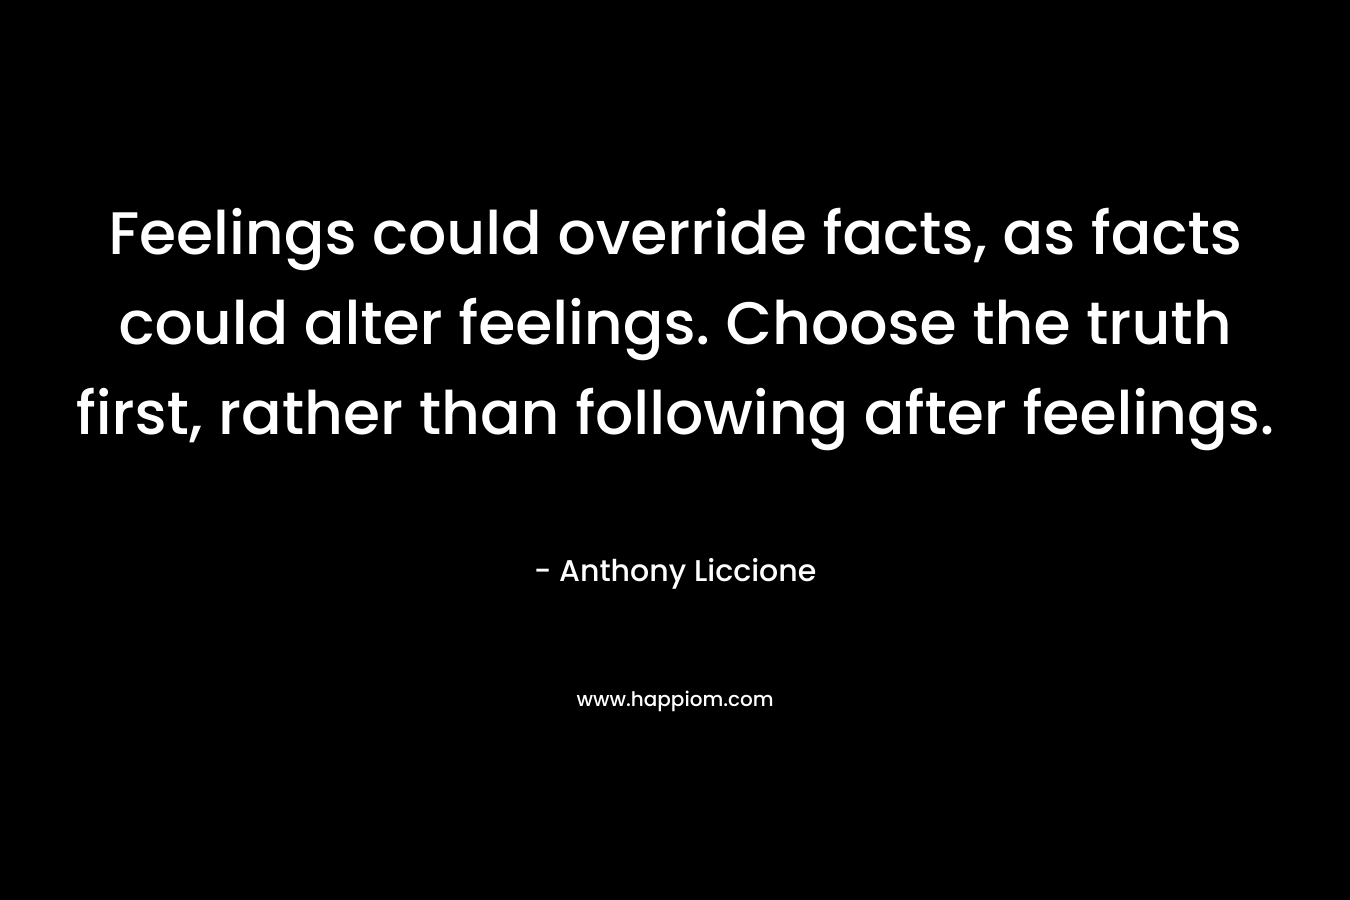 Feelings could override facts, as facts could alter feelings. Choose the truth first, rather than following after feelings. – Anthony Liccione